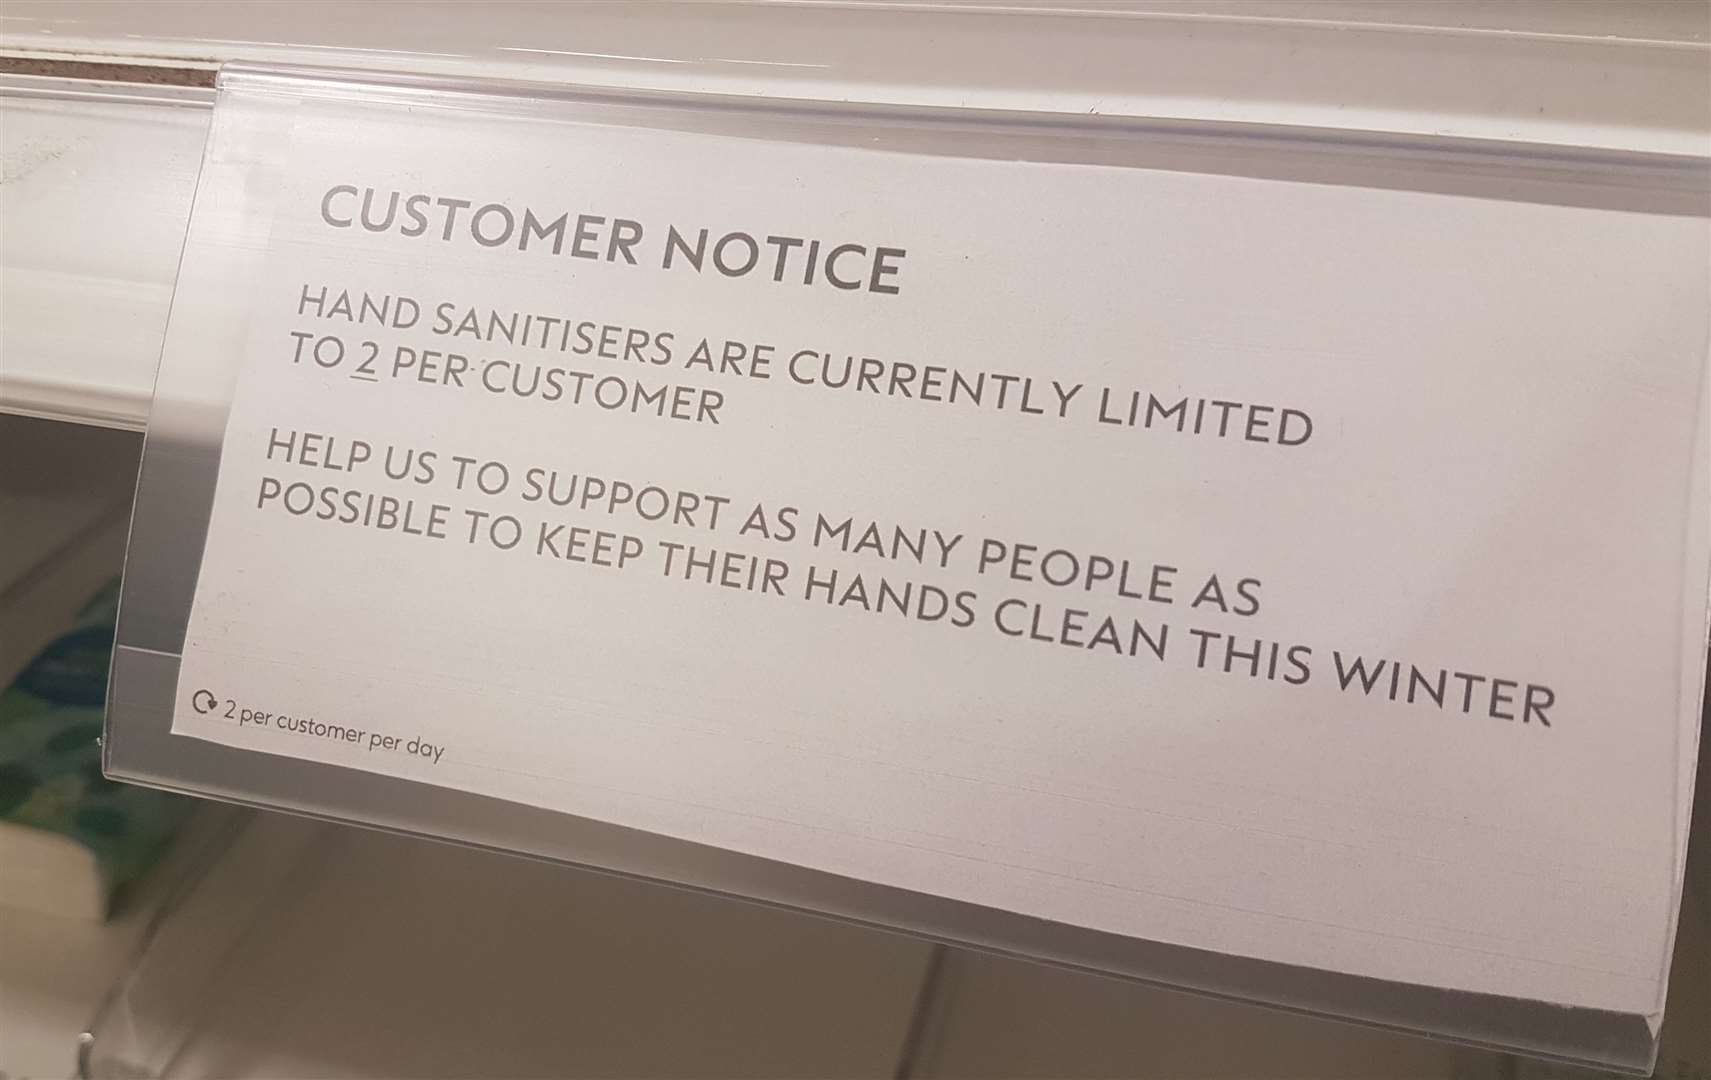 The notice warning shoppers of a hand sanitiser purchase limit